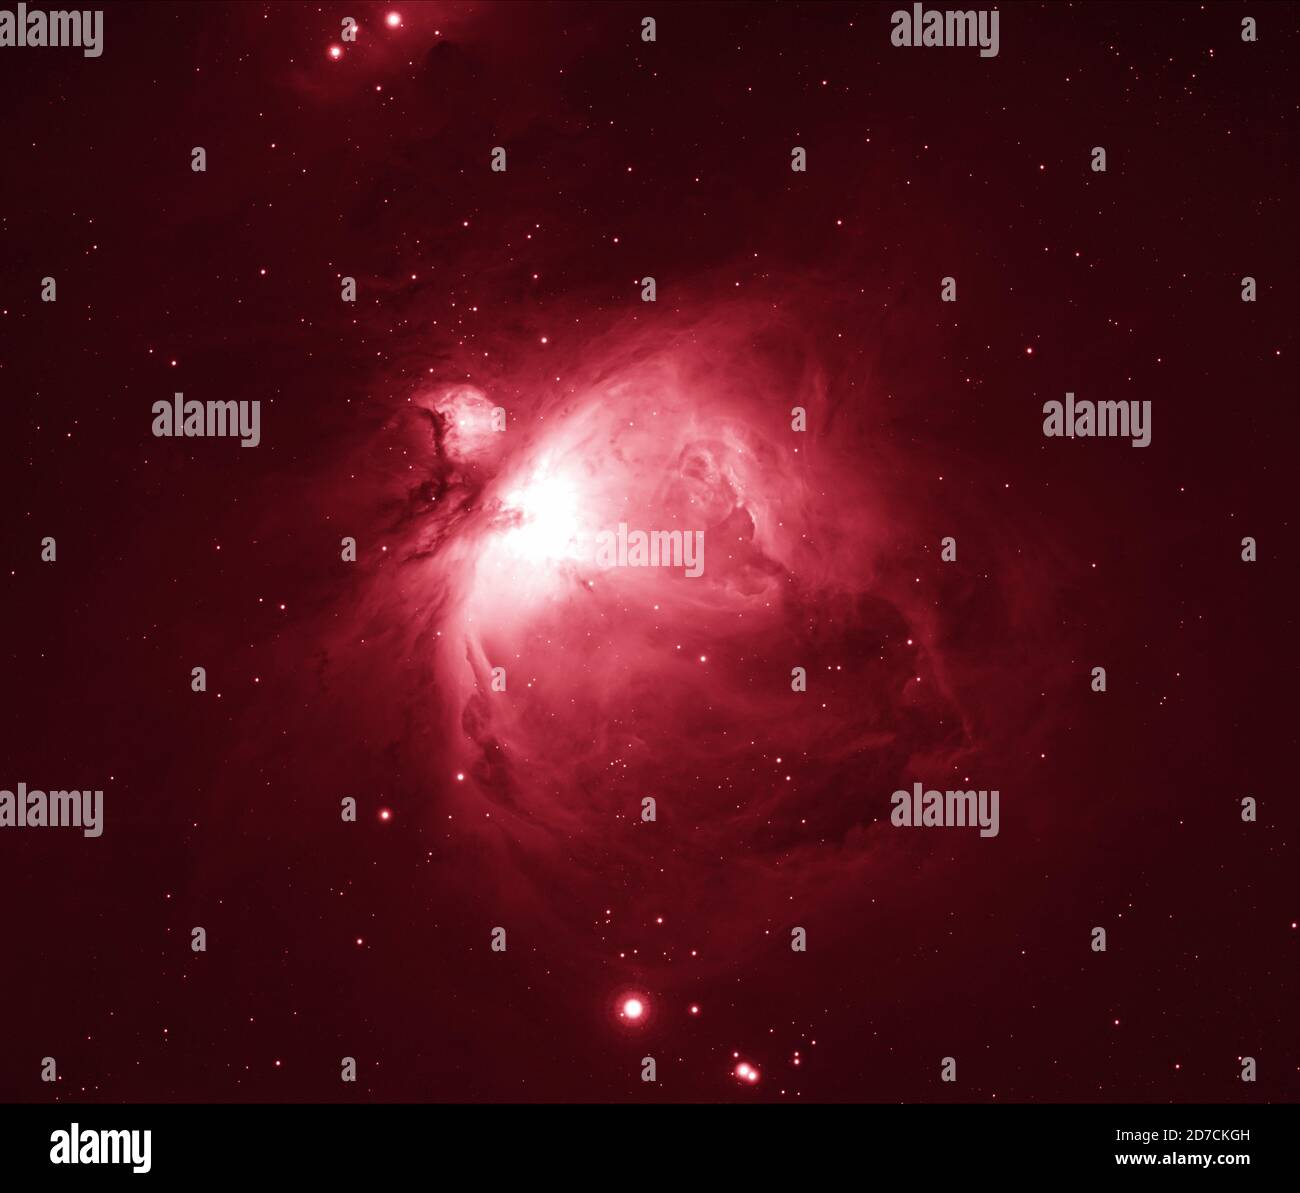 London, UK. 22 October 2020. Clear early morning sky over London allows photographer to take detailed image of the Orion Nebula using a narrowband filter to pick up Hydrogen emission region of this vast gas cloud 1344 light years from Earth. Credit: Malcolm Park/Alamy Live News. Stock Photo